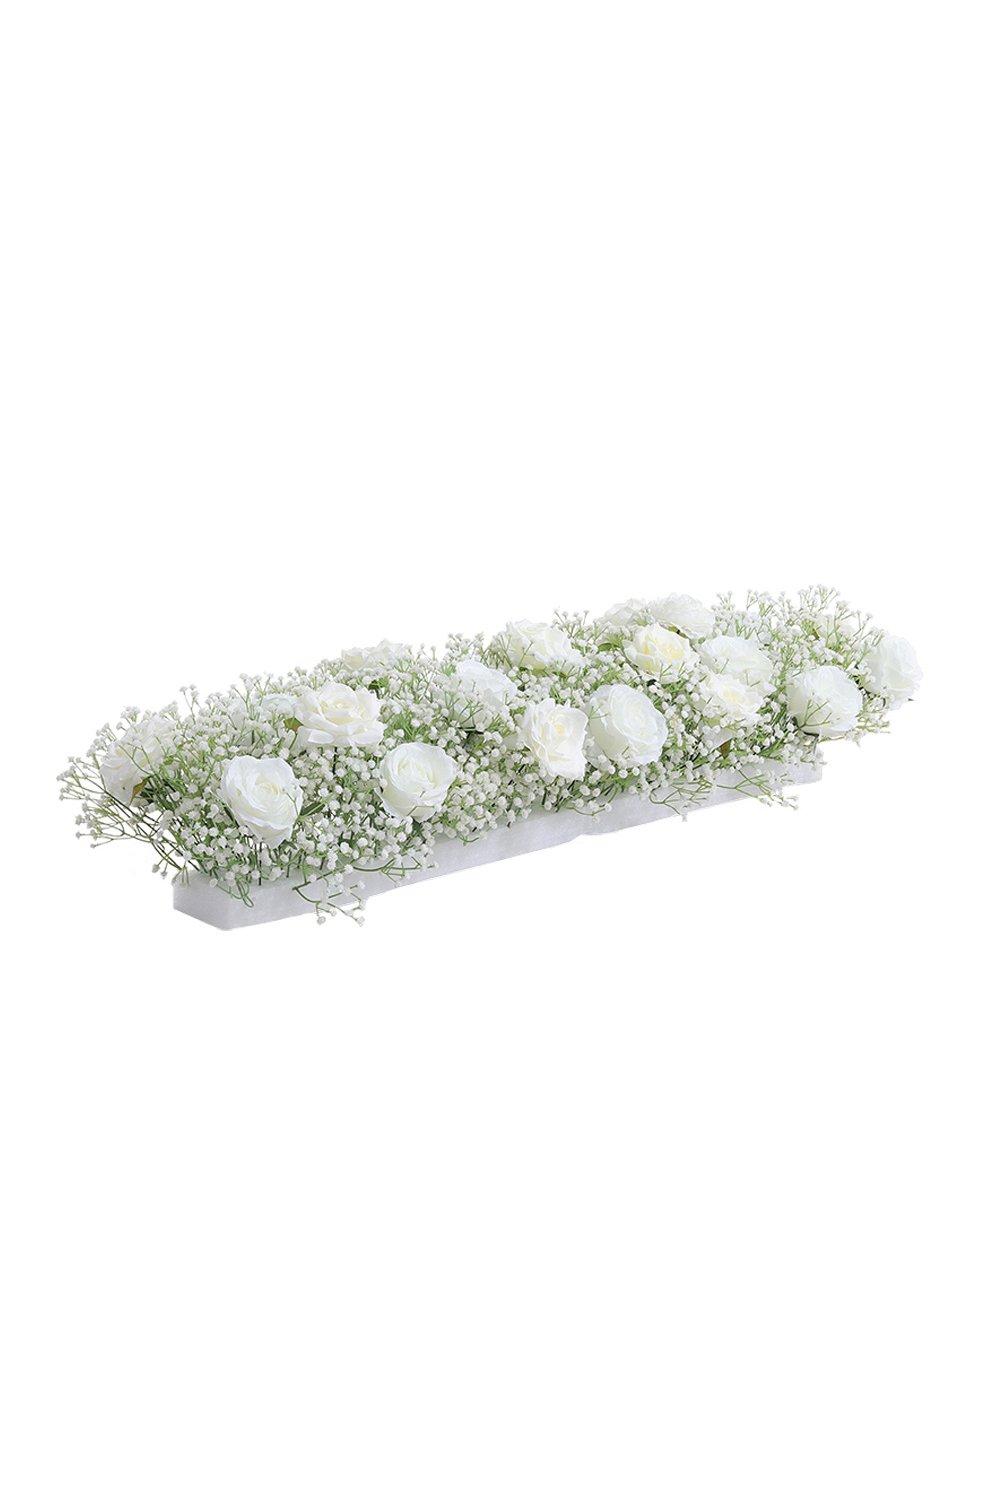 Artificial White Rose Flowers Row for Wedding Arch Table Centerpieces